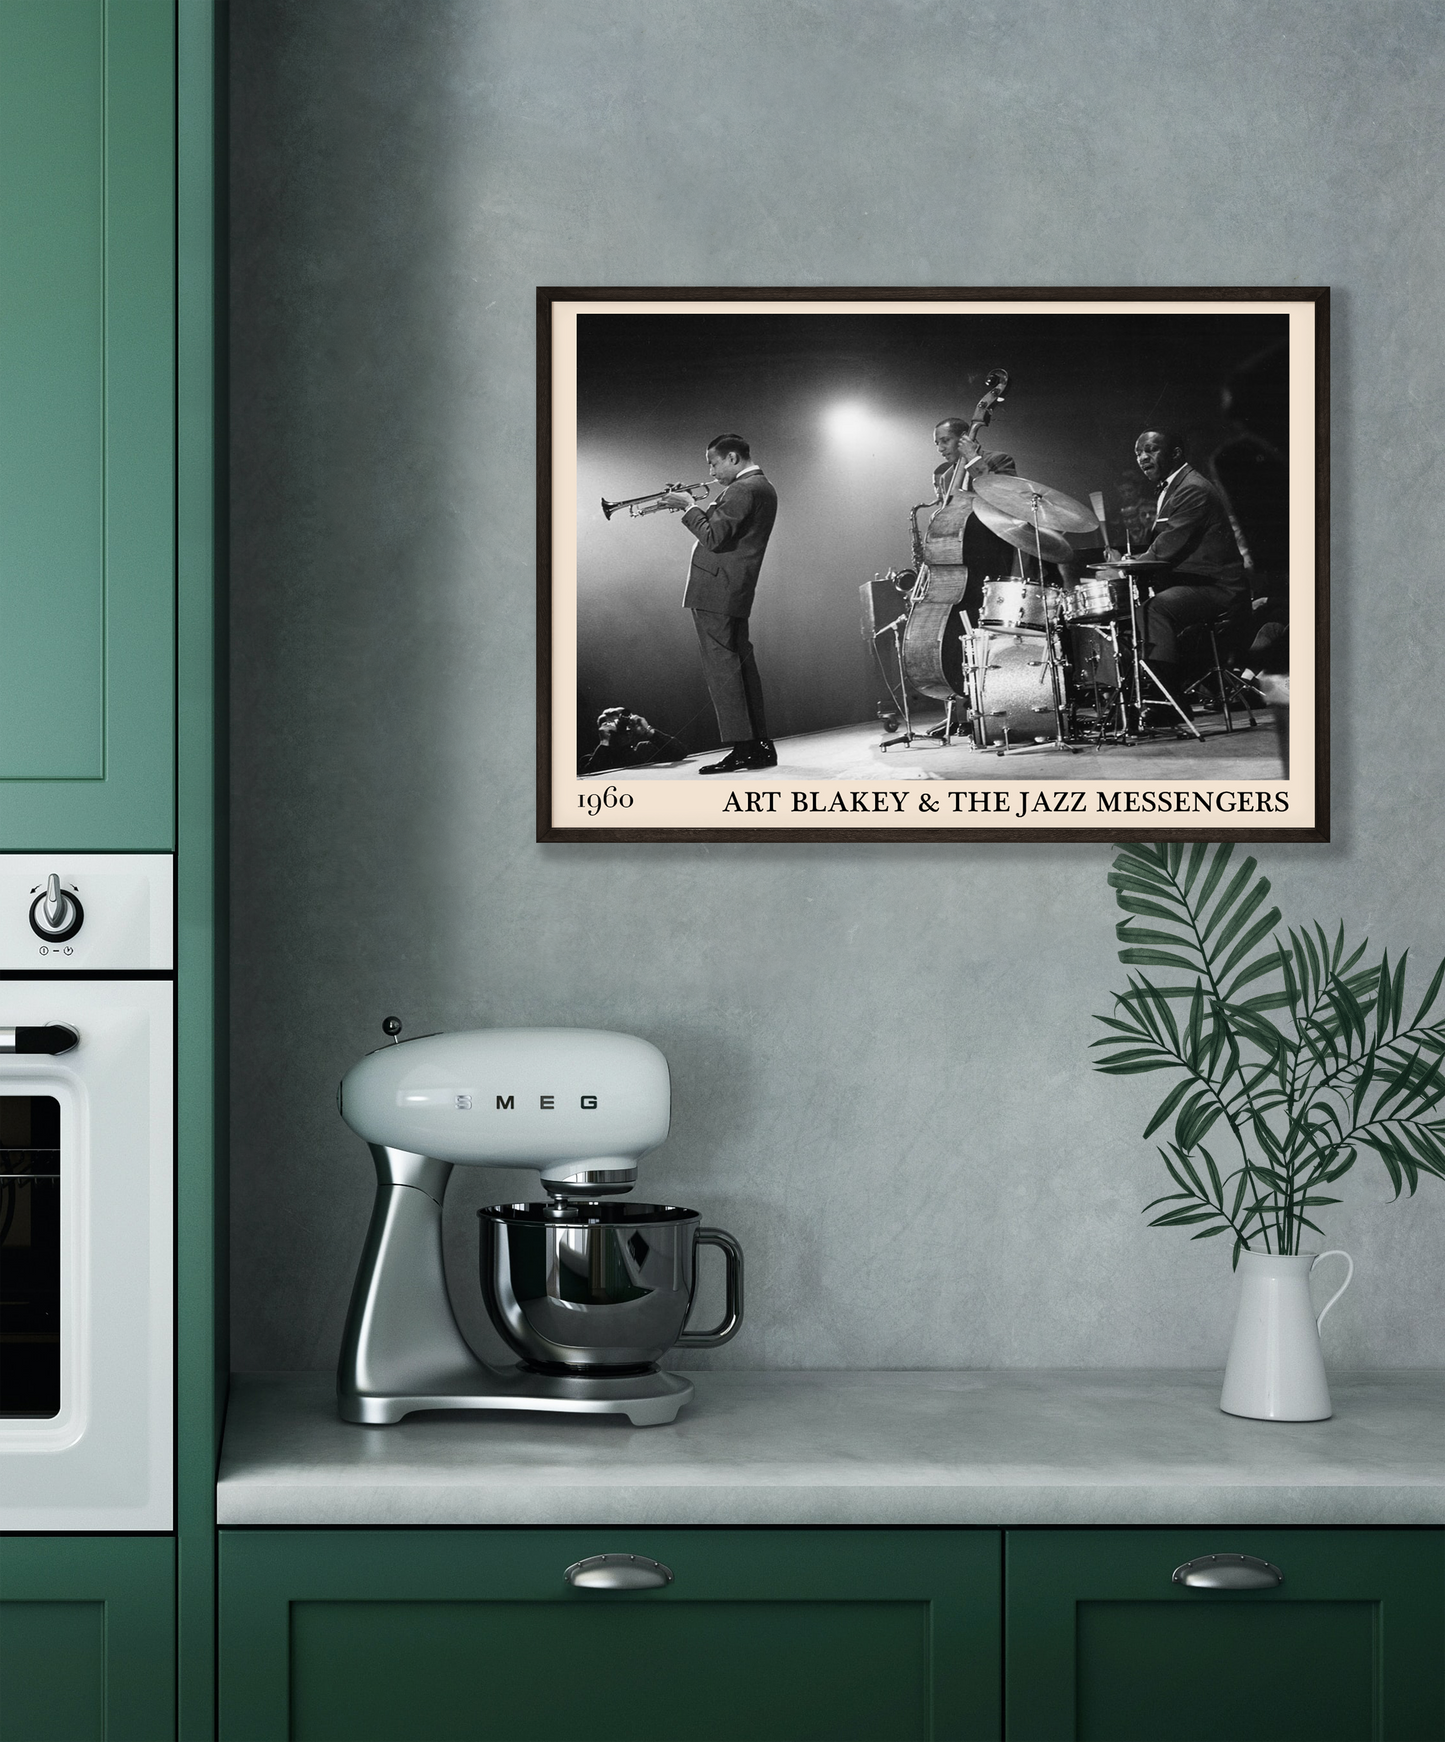 1960 framed jazz print of Art Blakey & The Jazz Messengers hanging on a grey kitchen wall